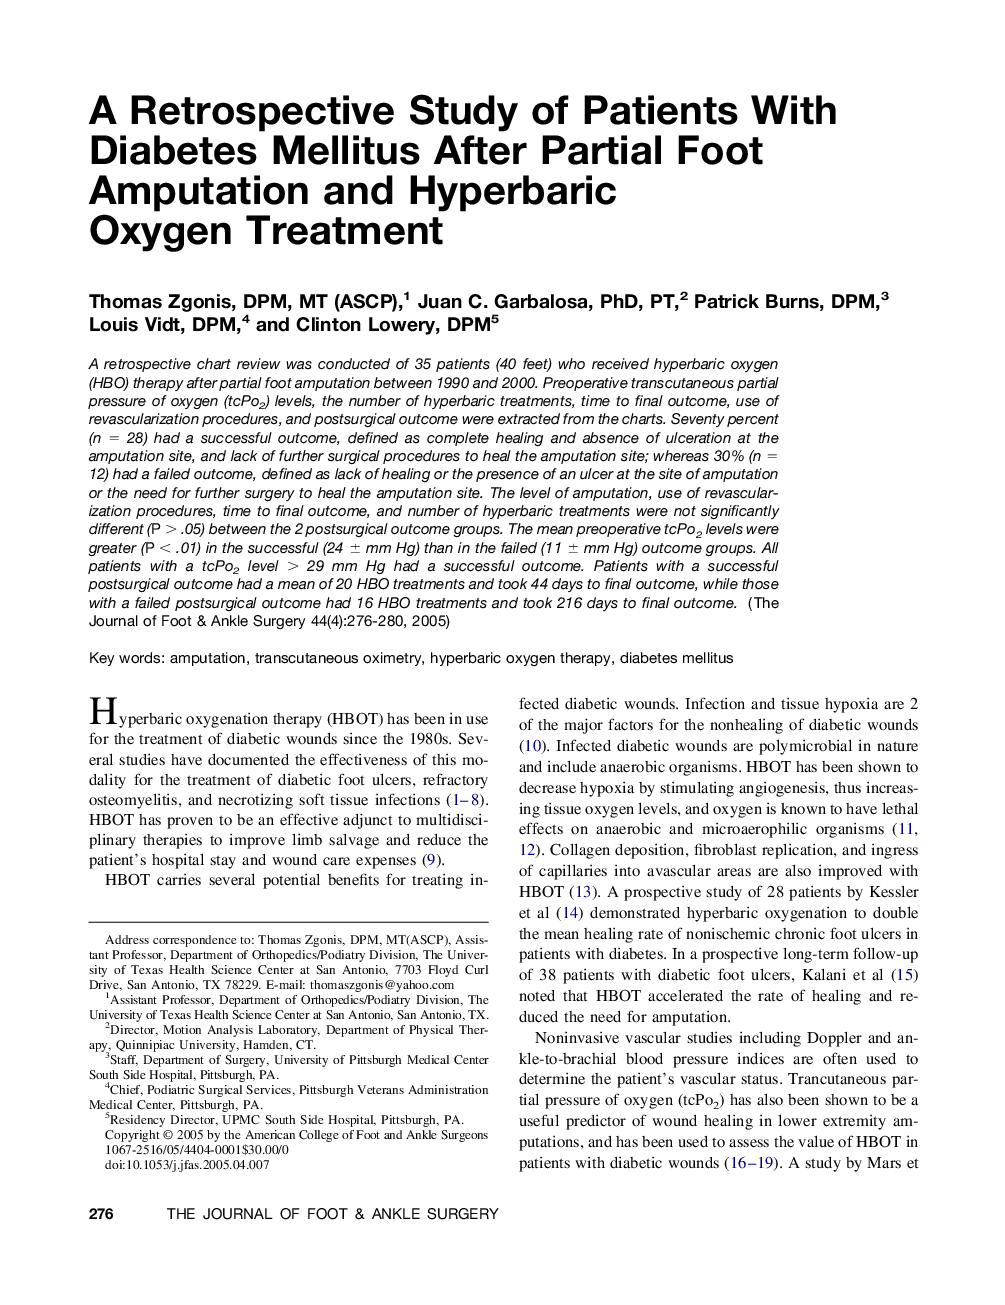 A Retrospective Study of Patients With Diabetes Mellitus After Partial Foot Amputation and Hyperbaric Oxygen Treatment